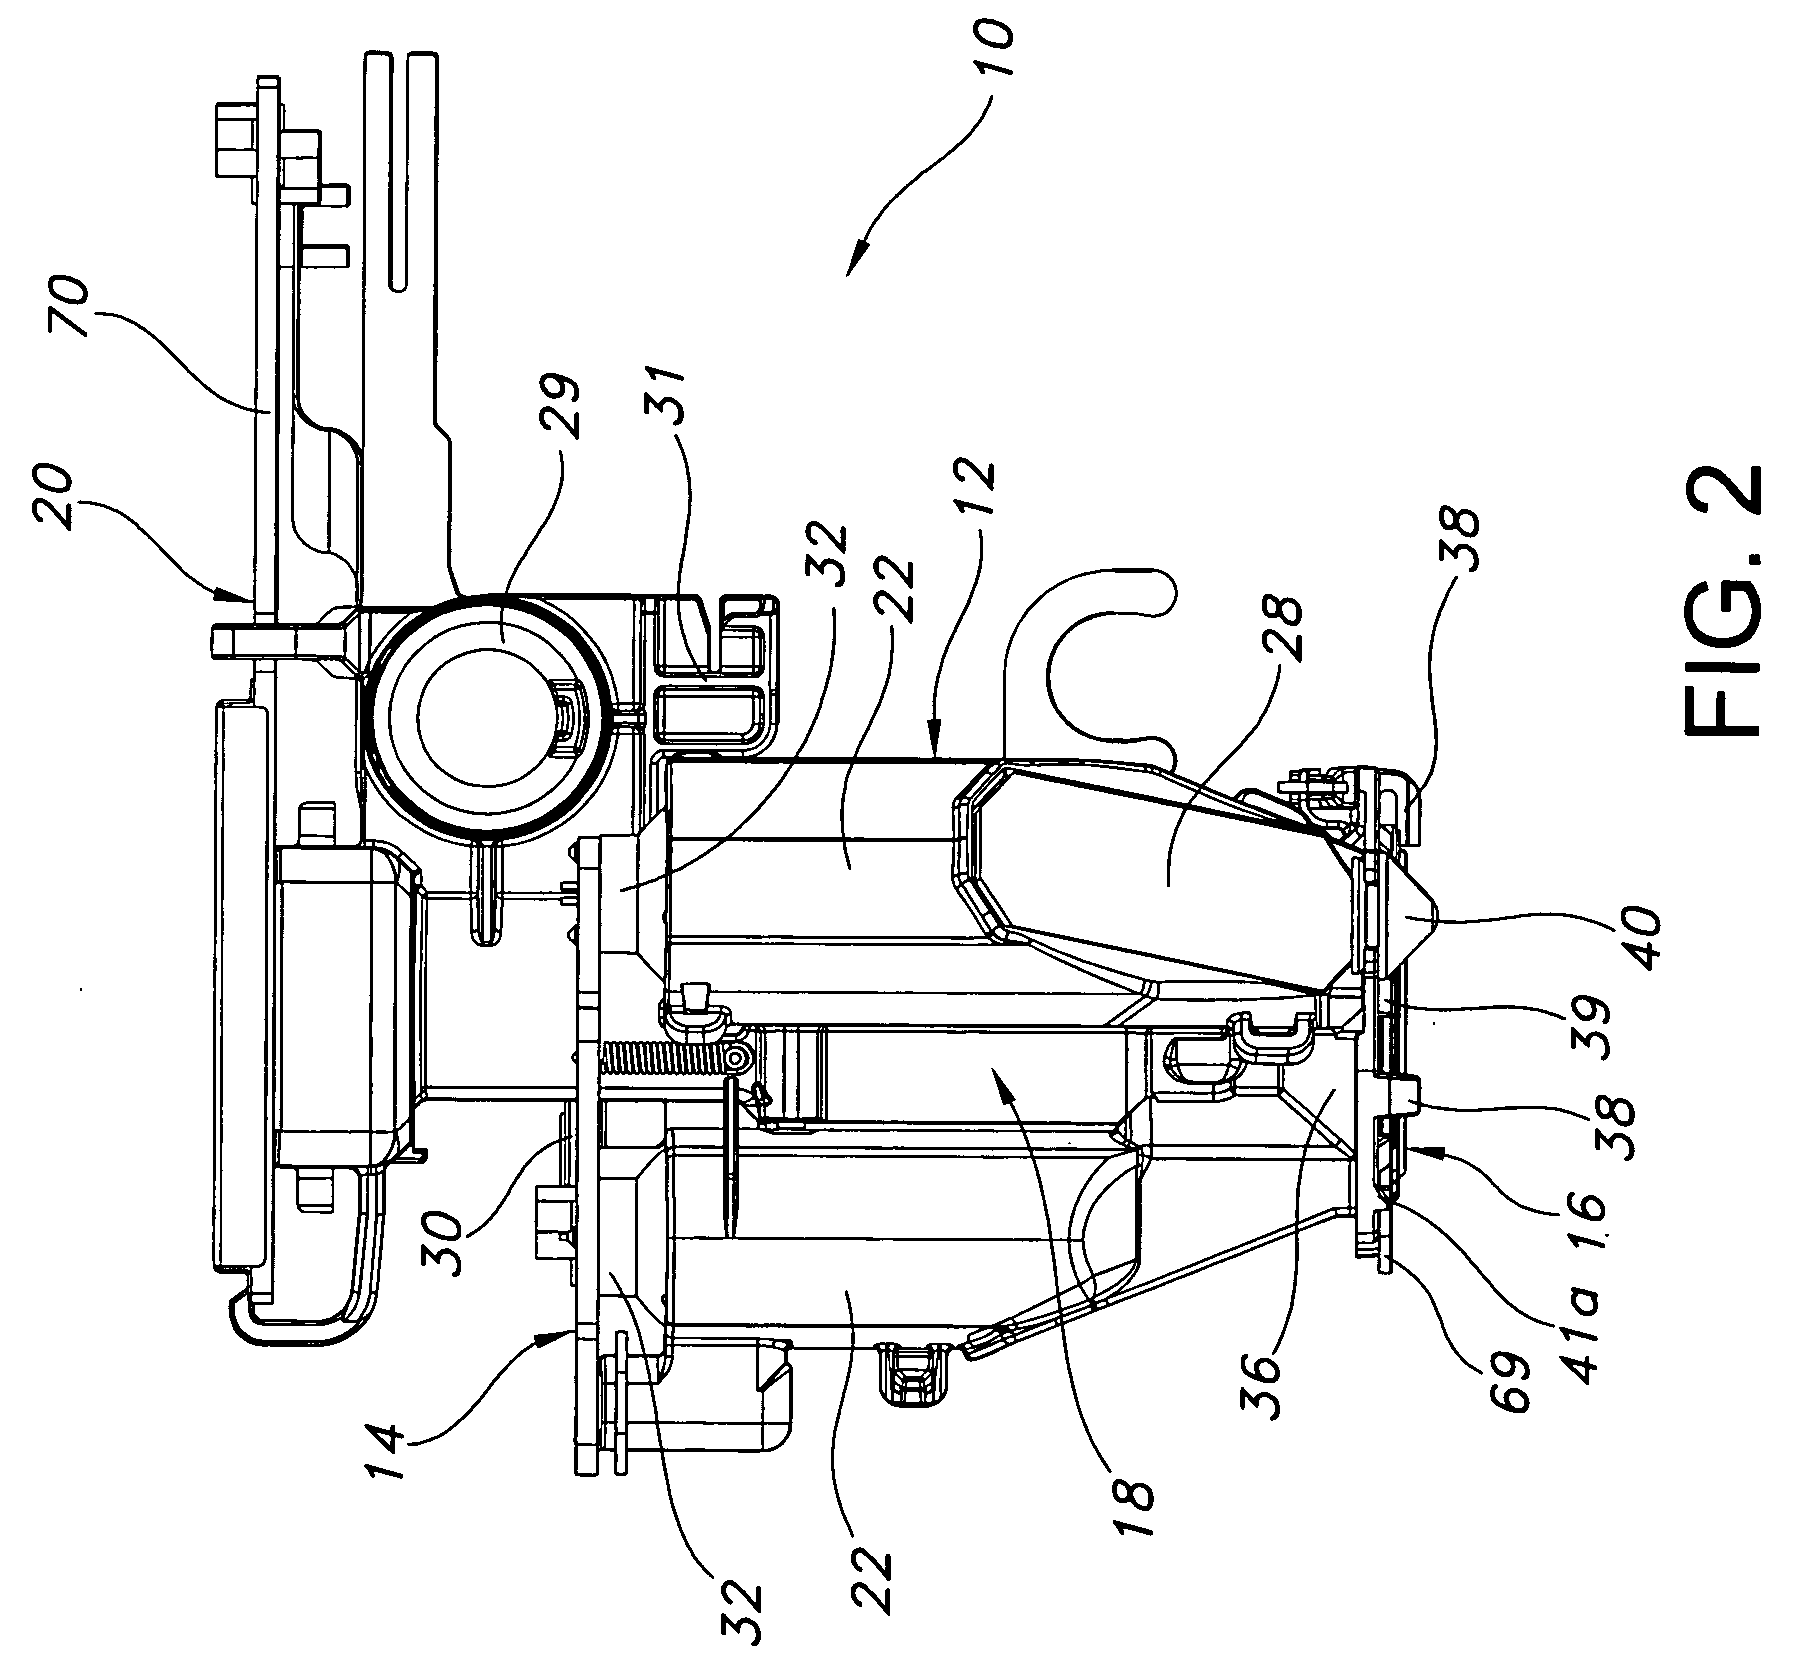 Color measurement engine with UV filtered illumination